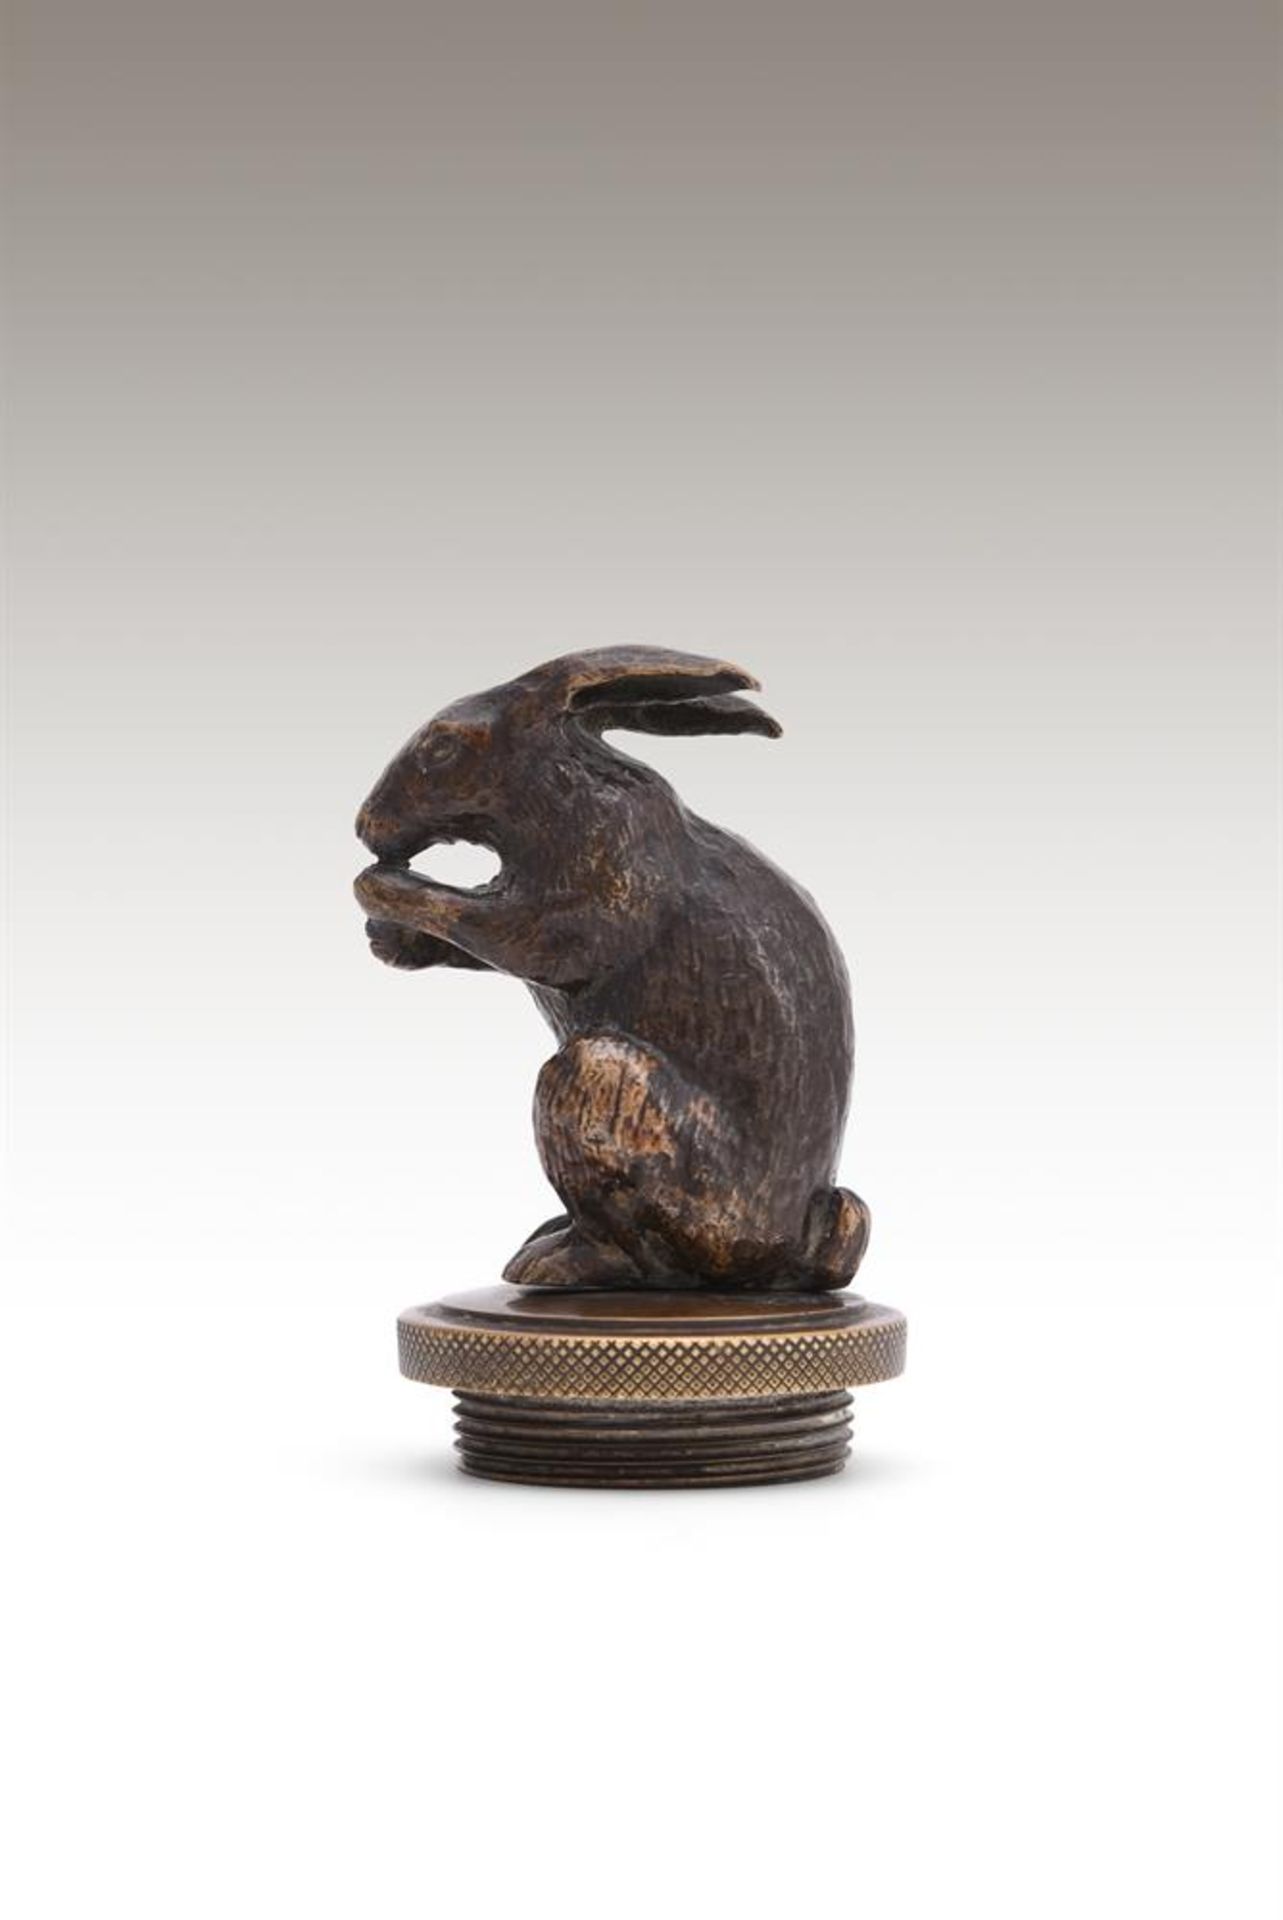 FRENCH SCHOOL, A BRONZE RADIATOR CAP MODELLED AS A STANDING RABBIT - Image 4 of 4